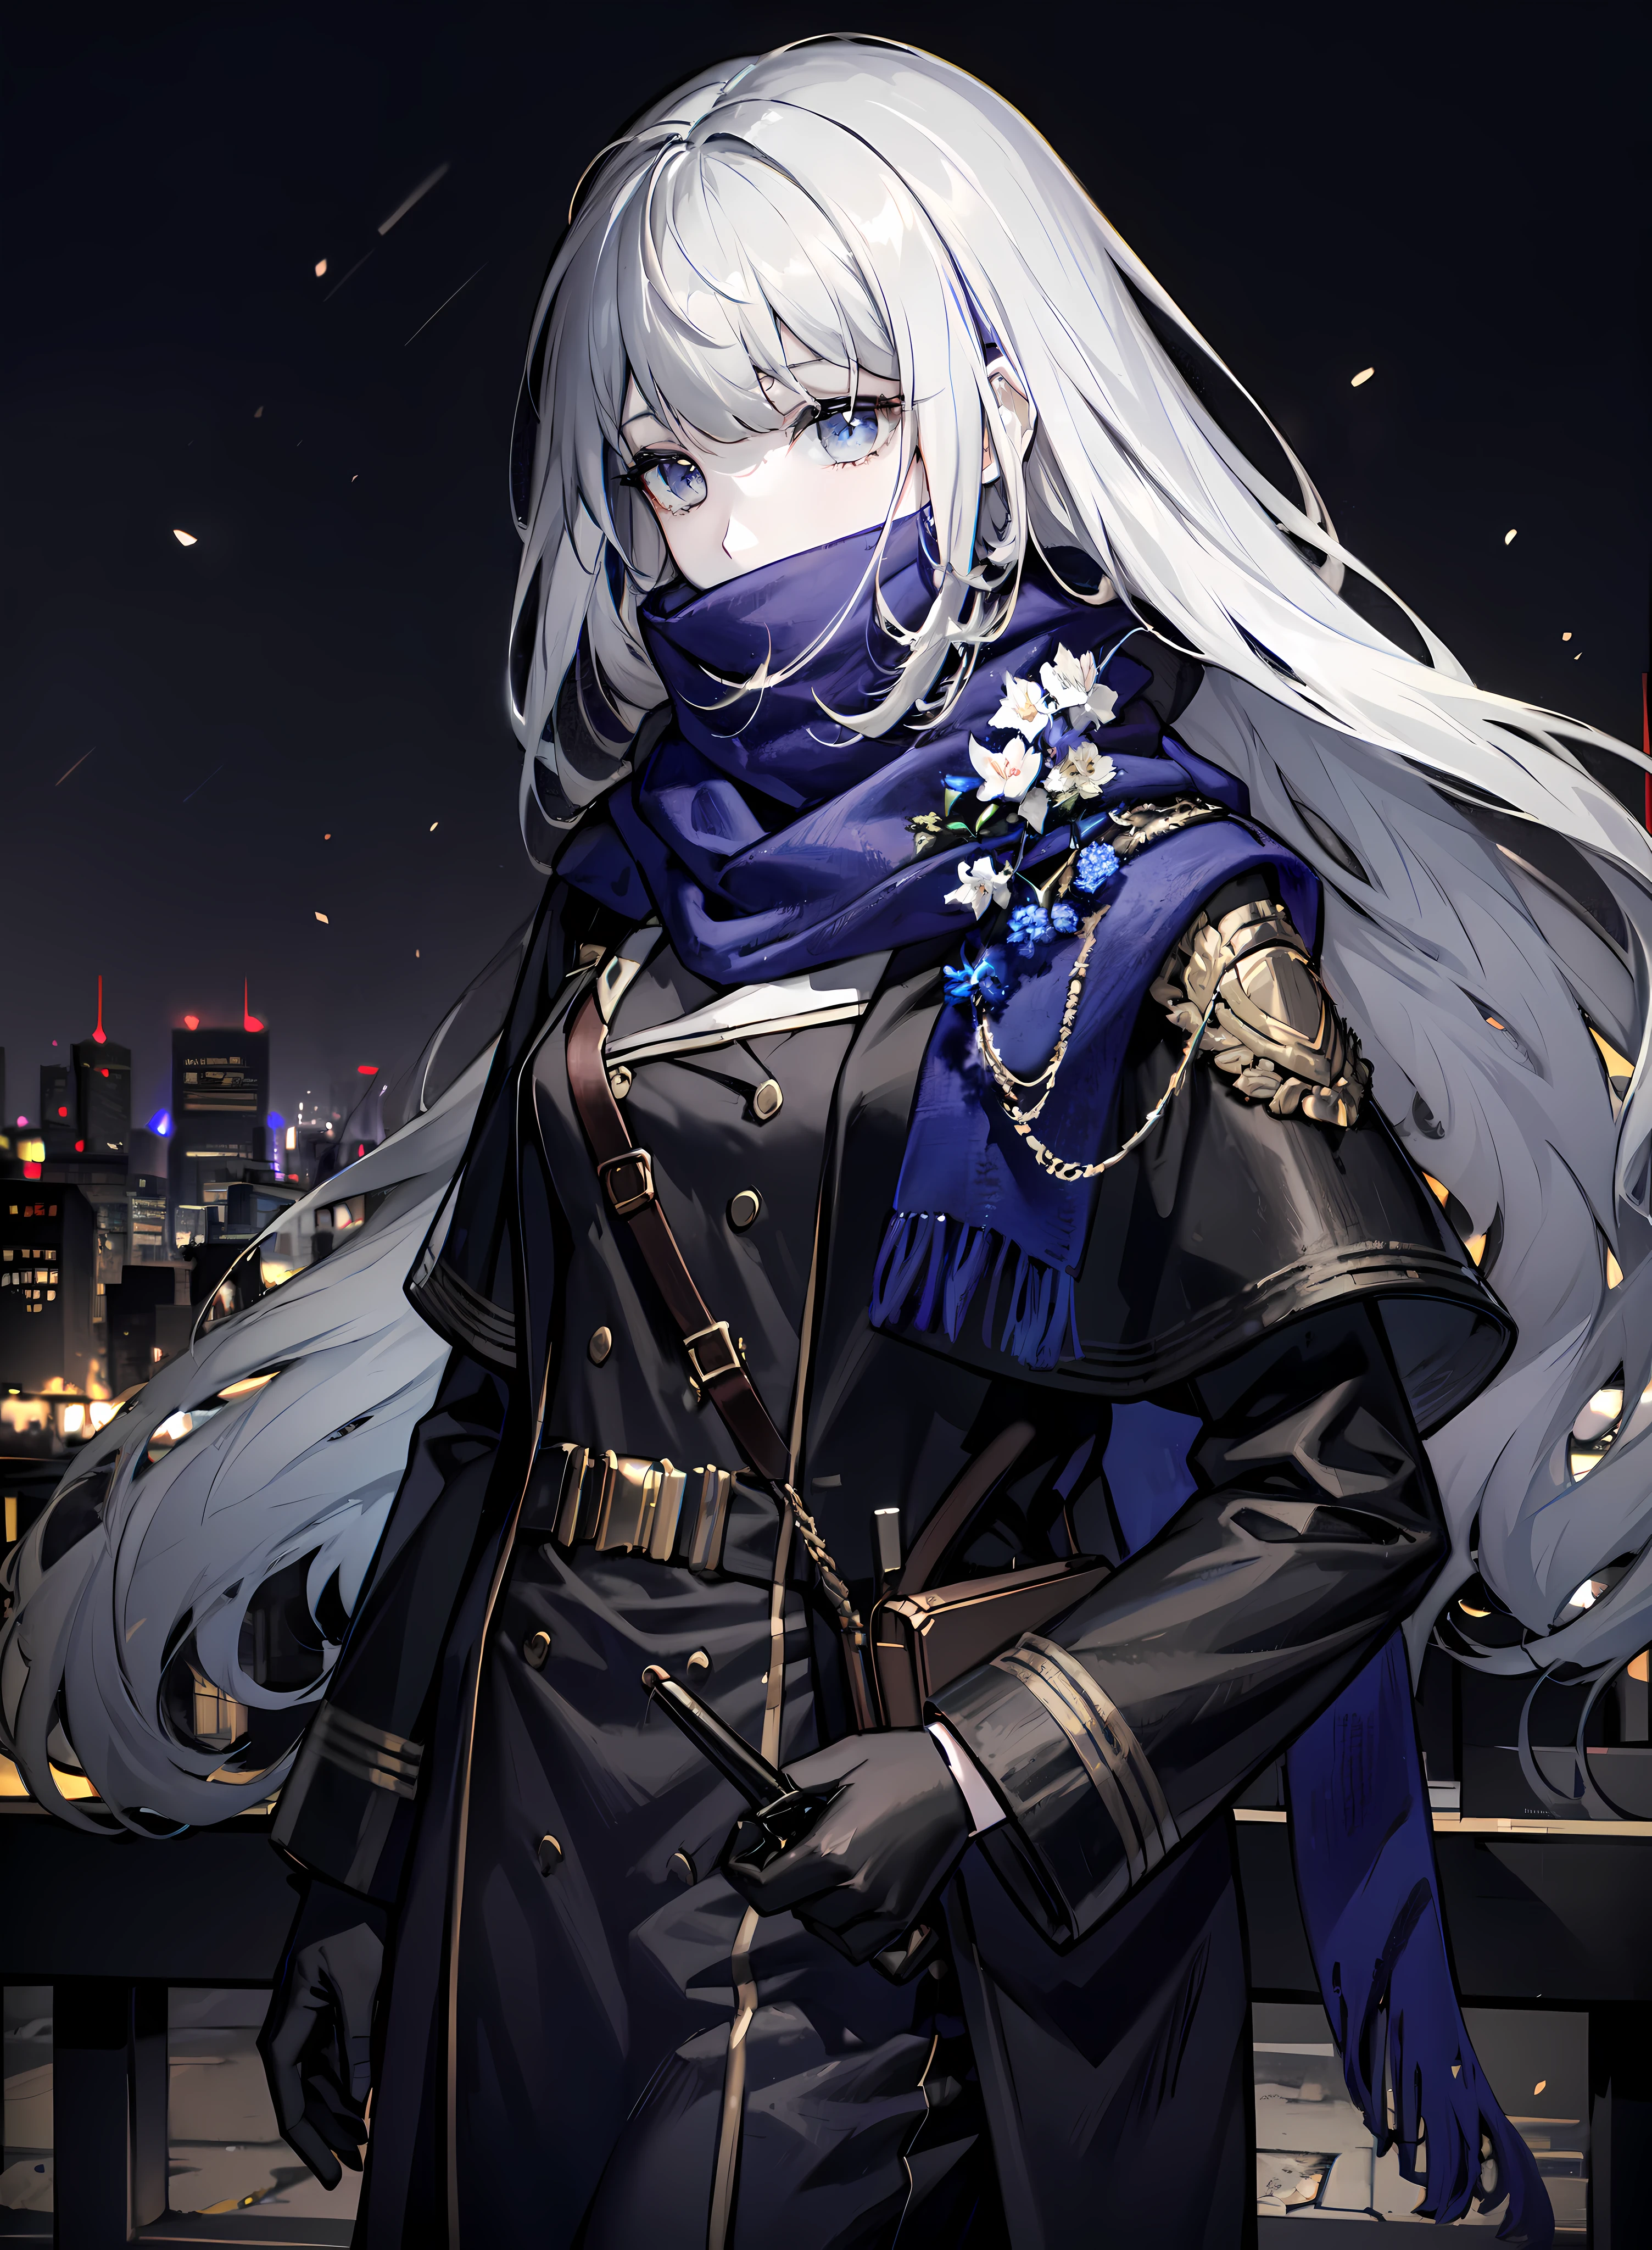 (masterpiece:1.2), (pale skin:1.2), (solo:1.2), (female:1.1), (emphasis lines:1.3), long hair, gray hair, blue scarf, (long black coat), black gloves, (outdoors), handheld transreceiver, (city), night